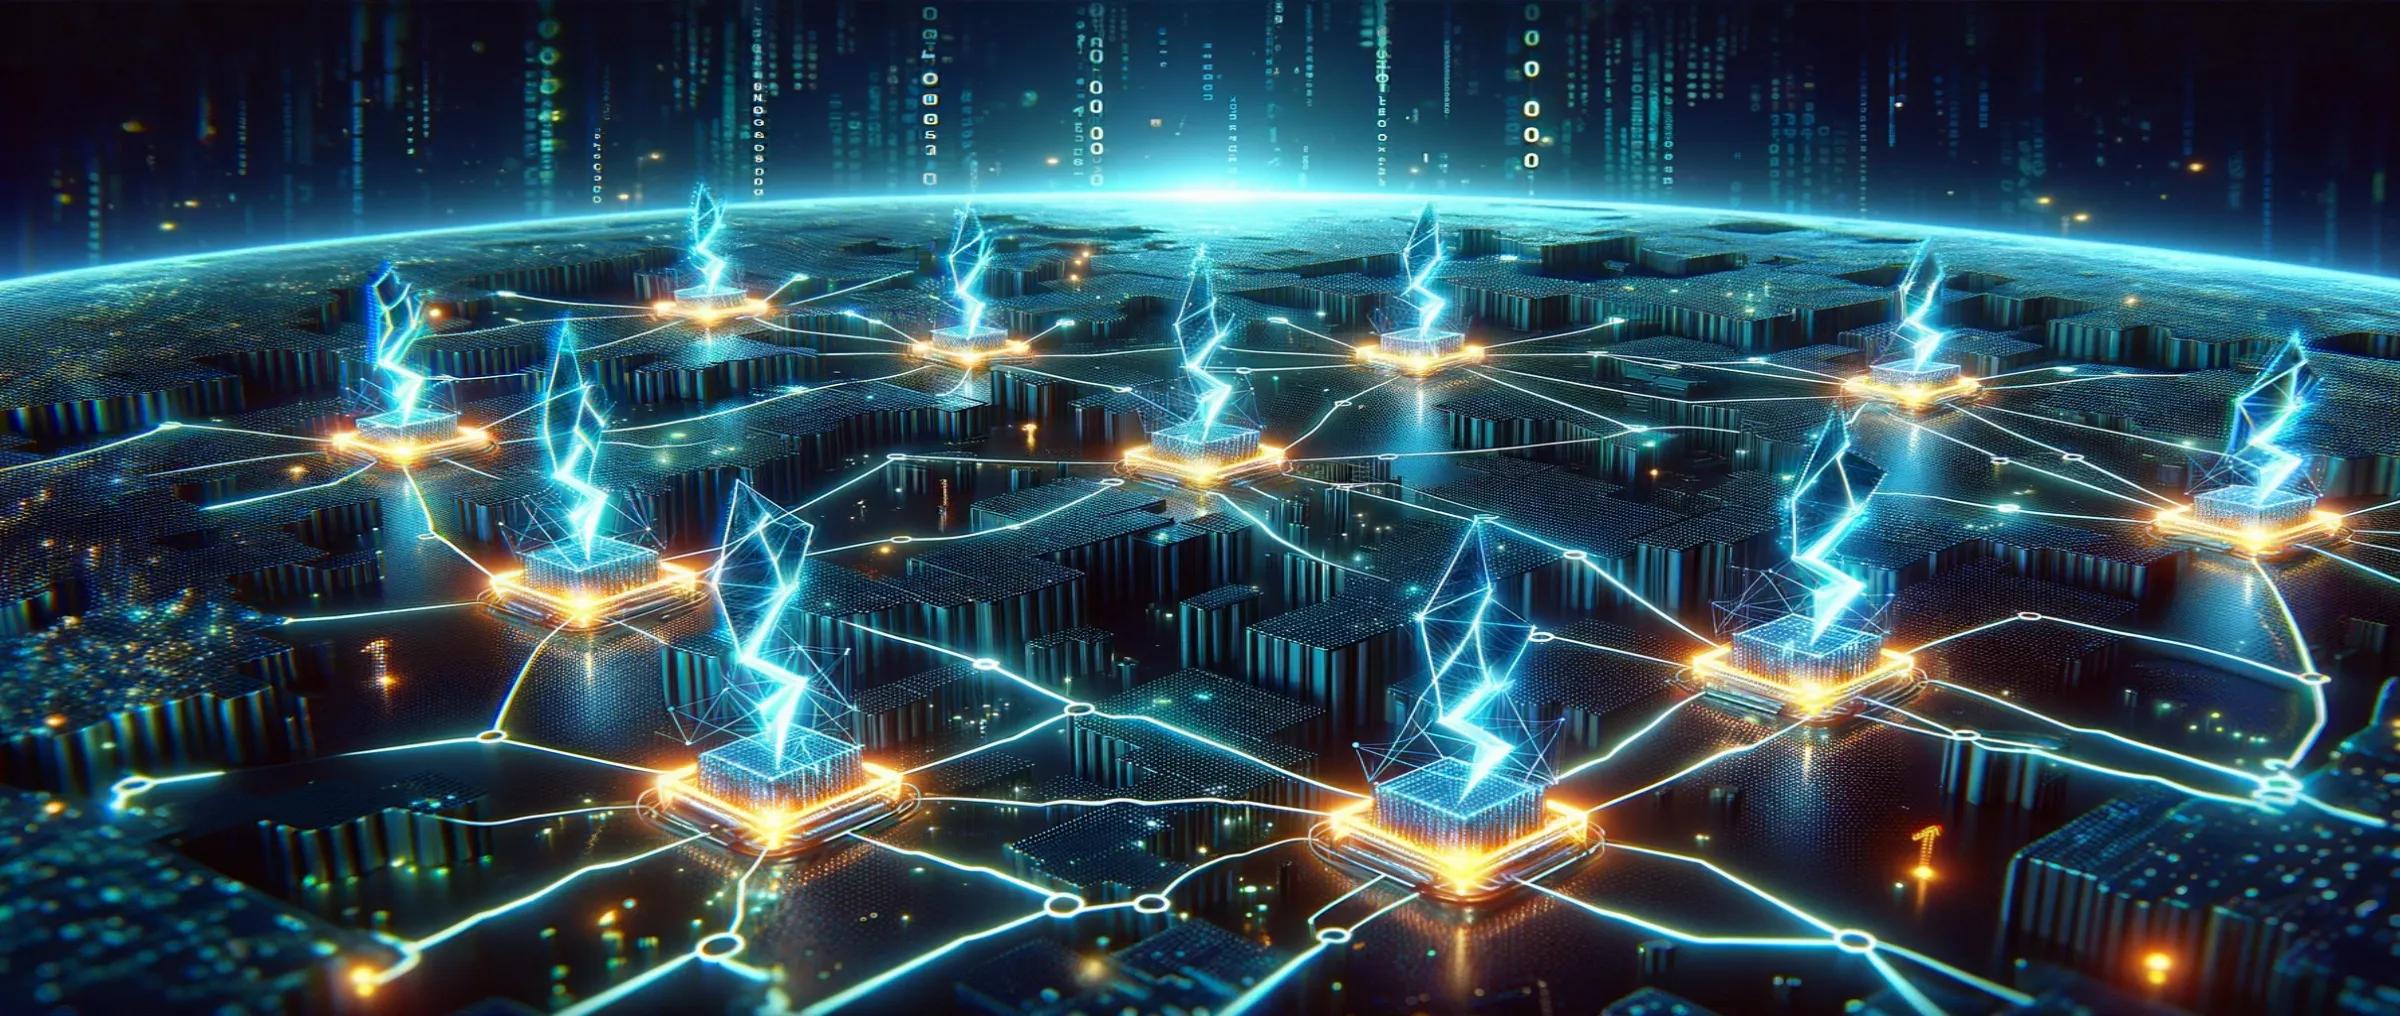 Only 6% of cryptocurrency exchanges use Lightning Network, a Layer 2 solution